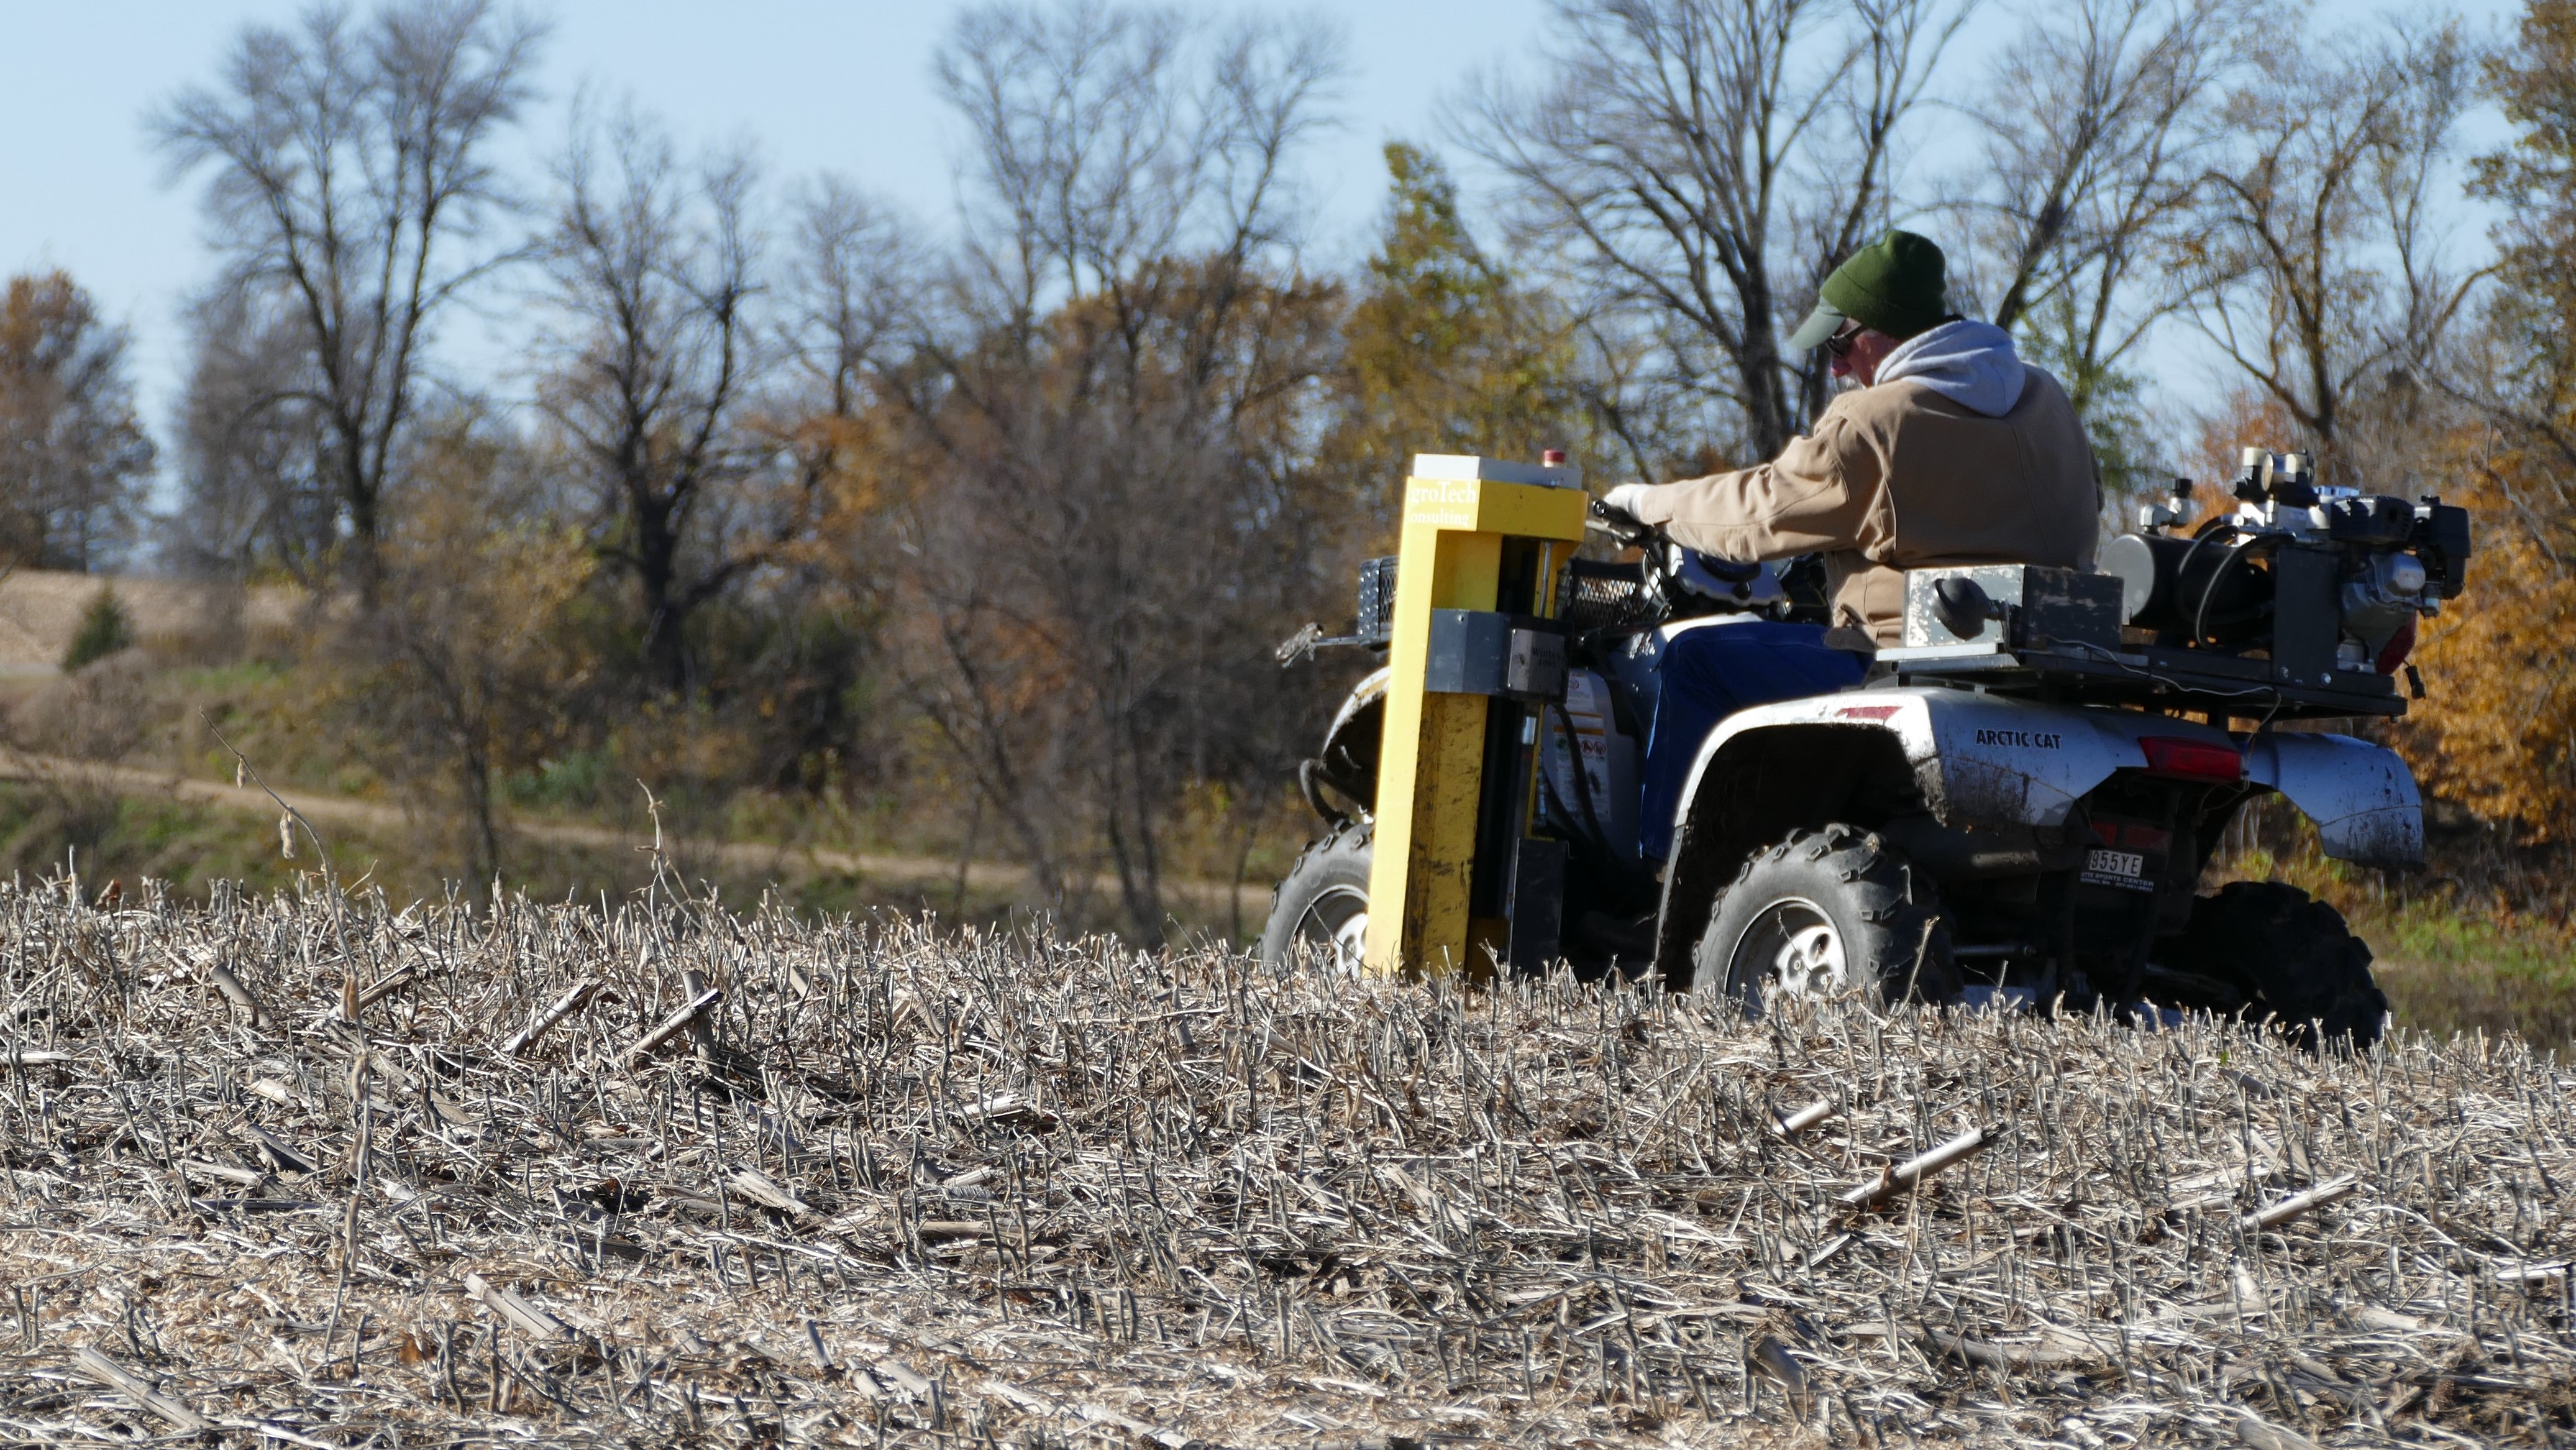 Taking soil samples for nitrogen analysis could pay big this year